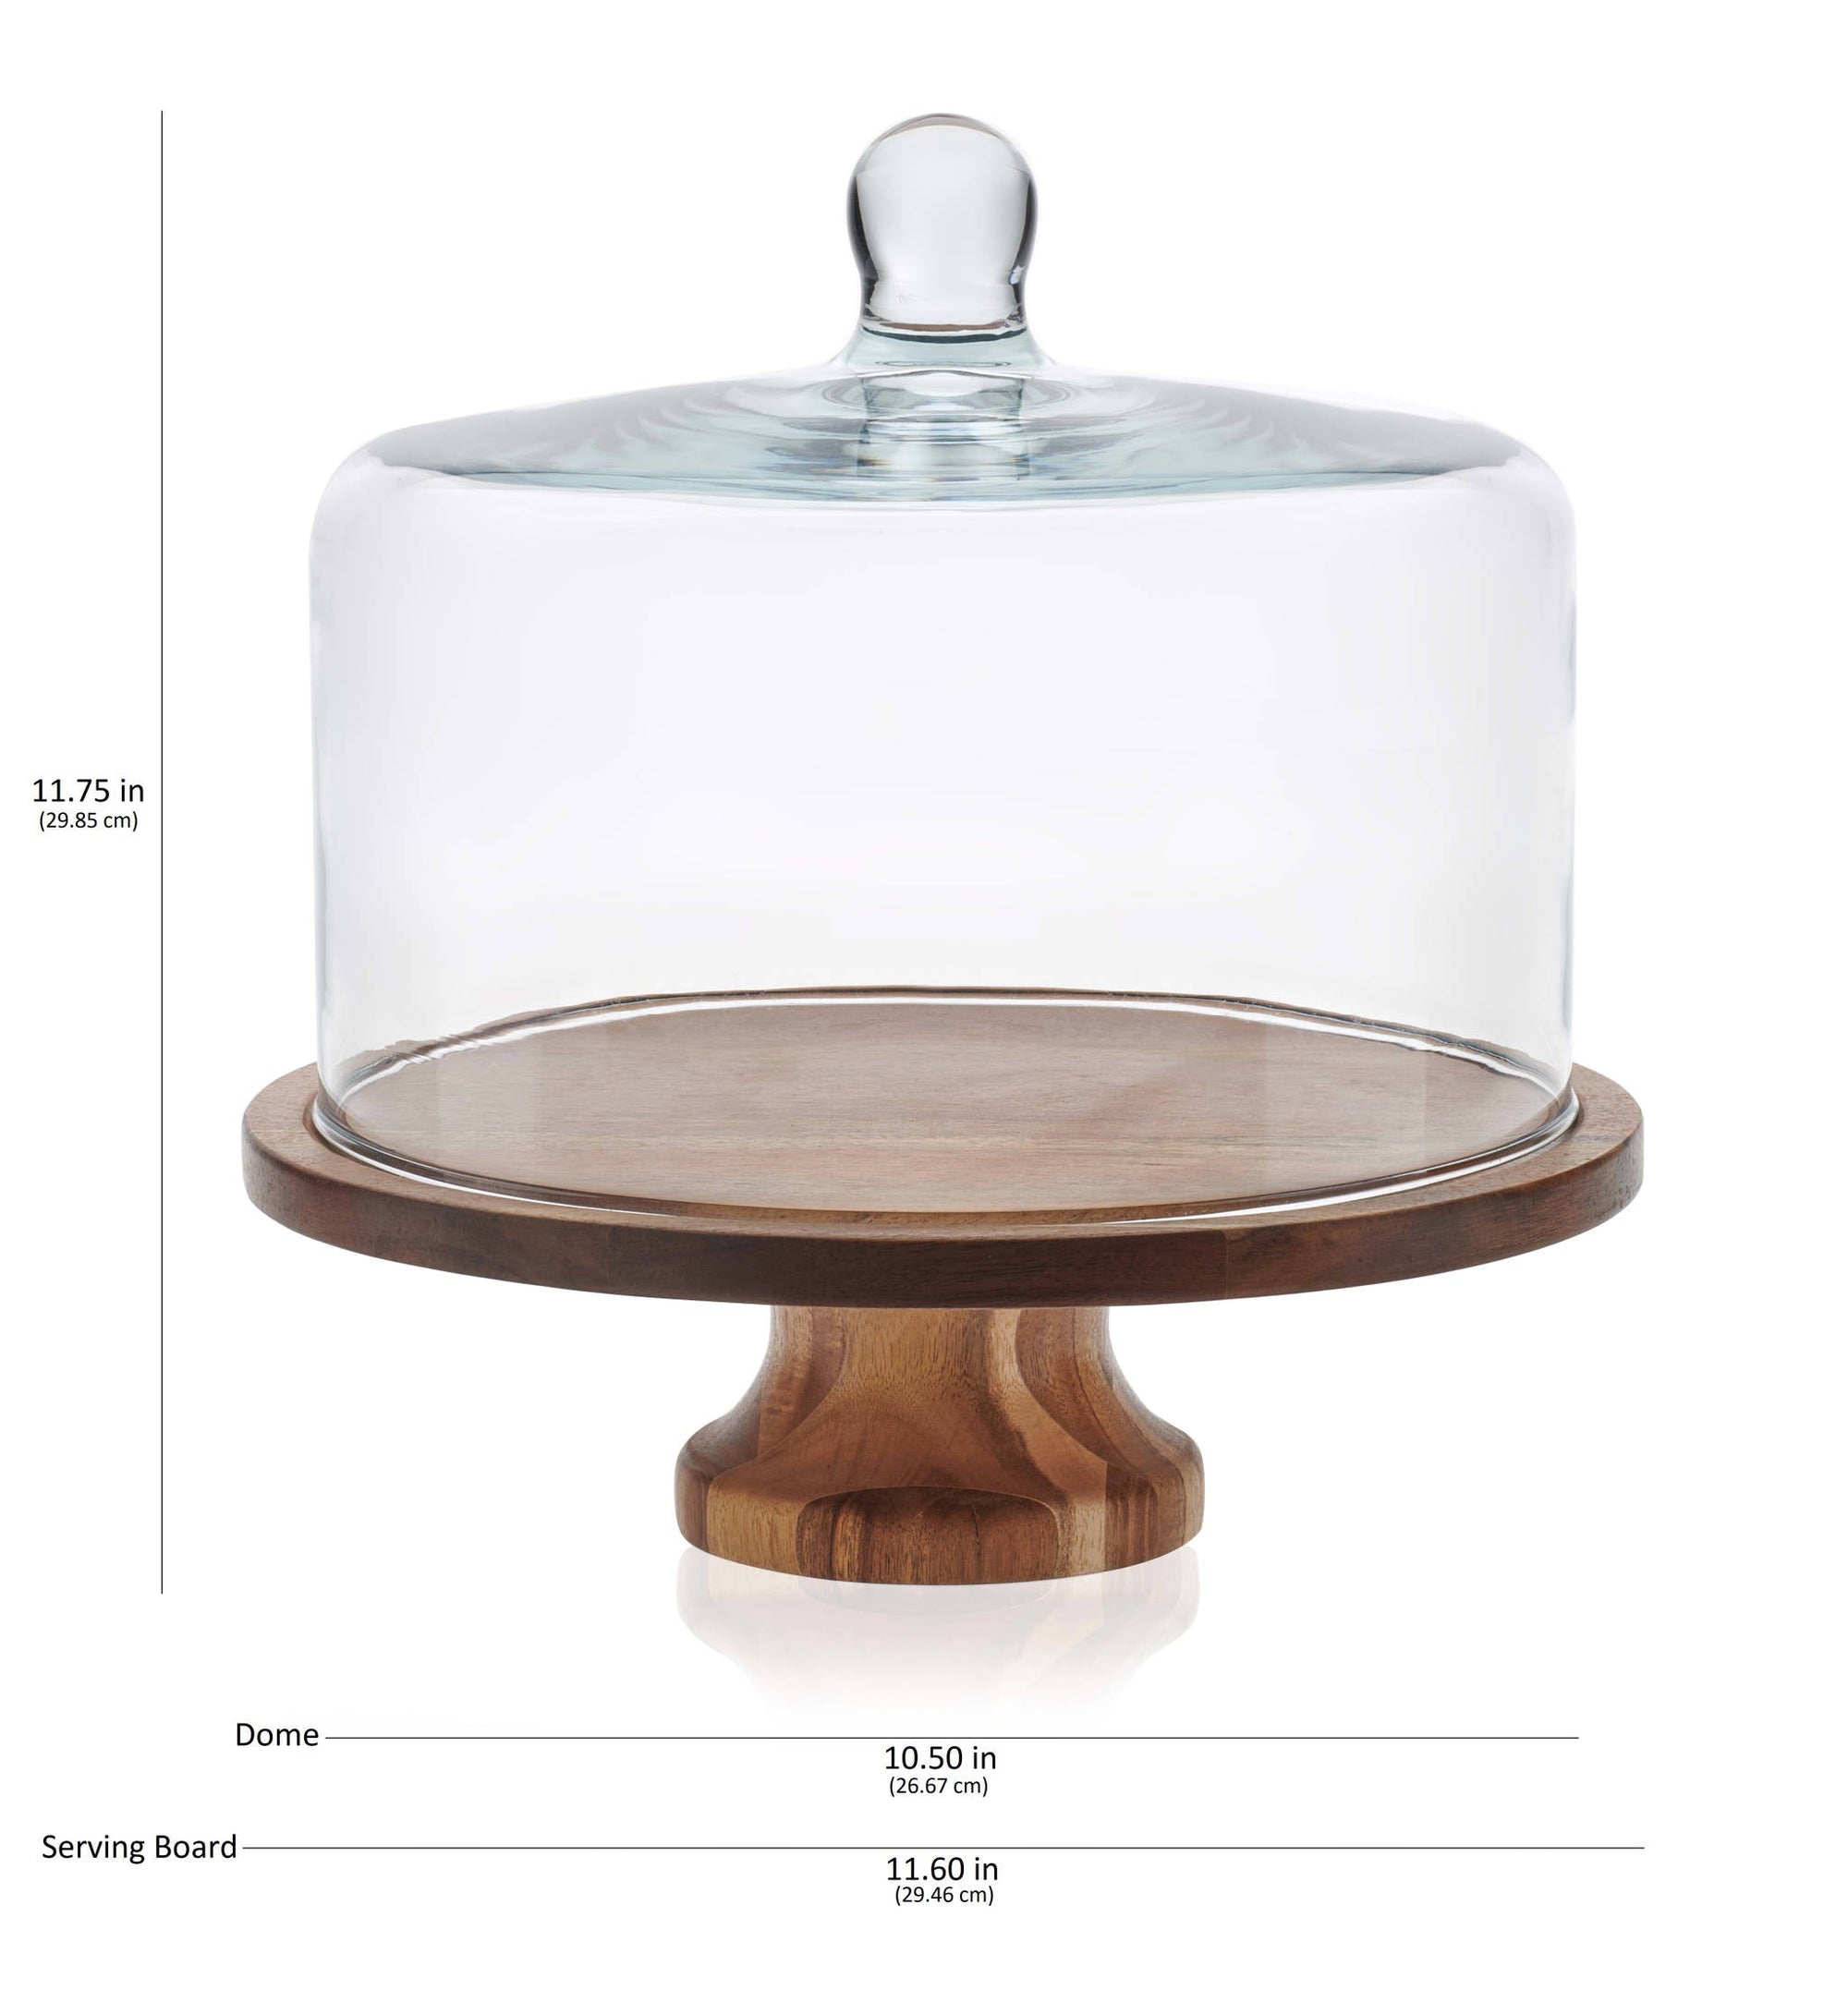 Acaciawood Footed Round Wood Server Cake Stand with Glass Dome